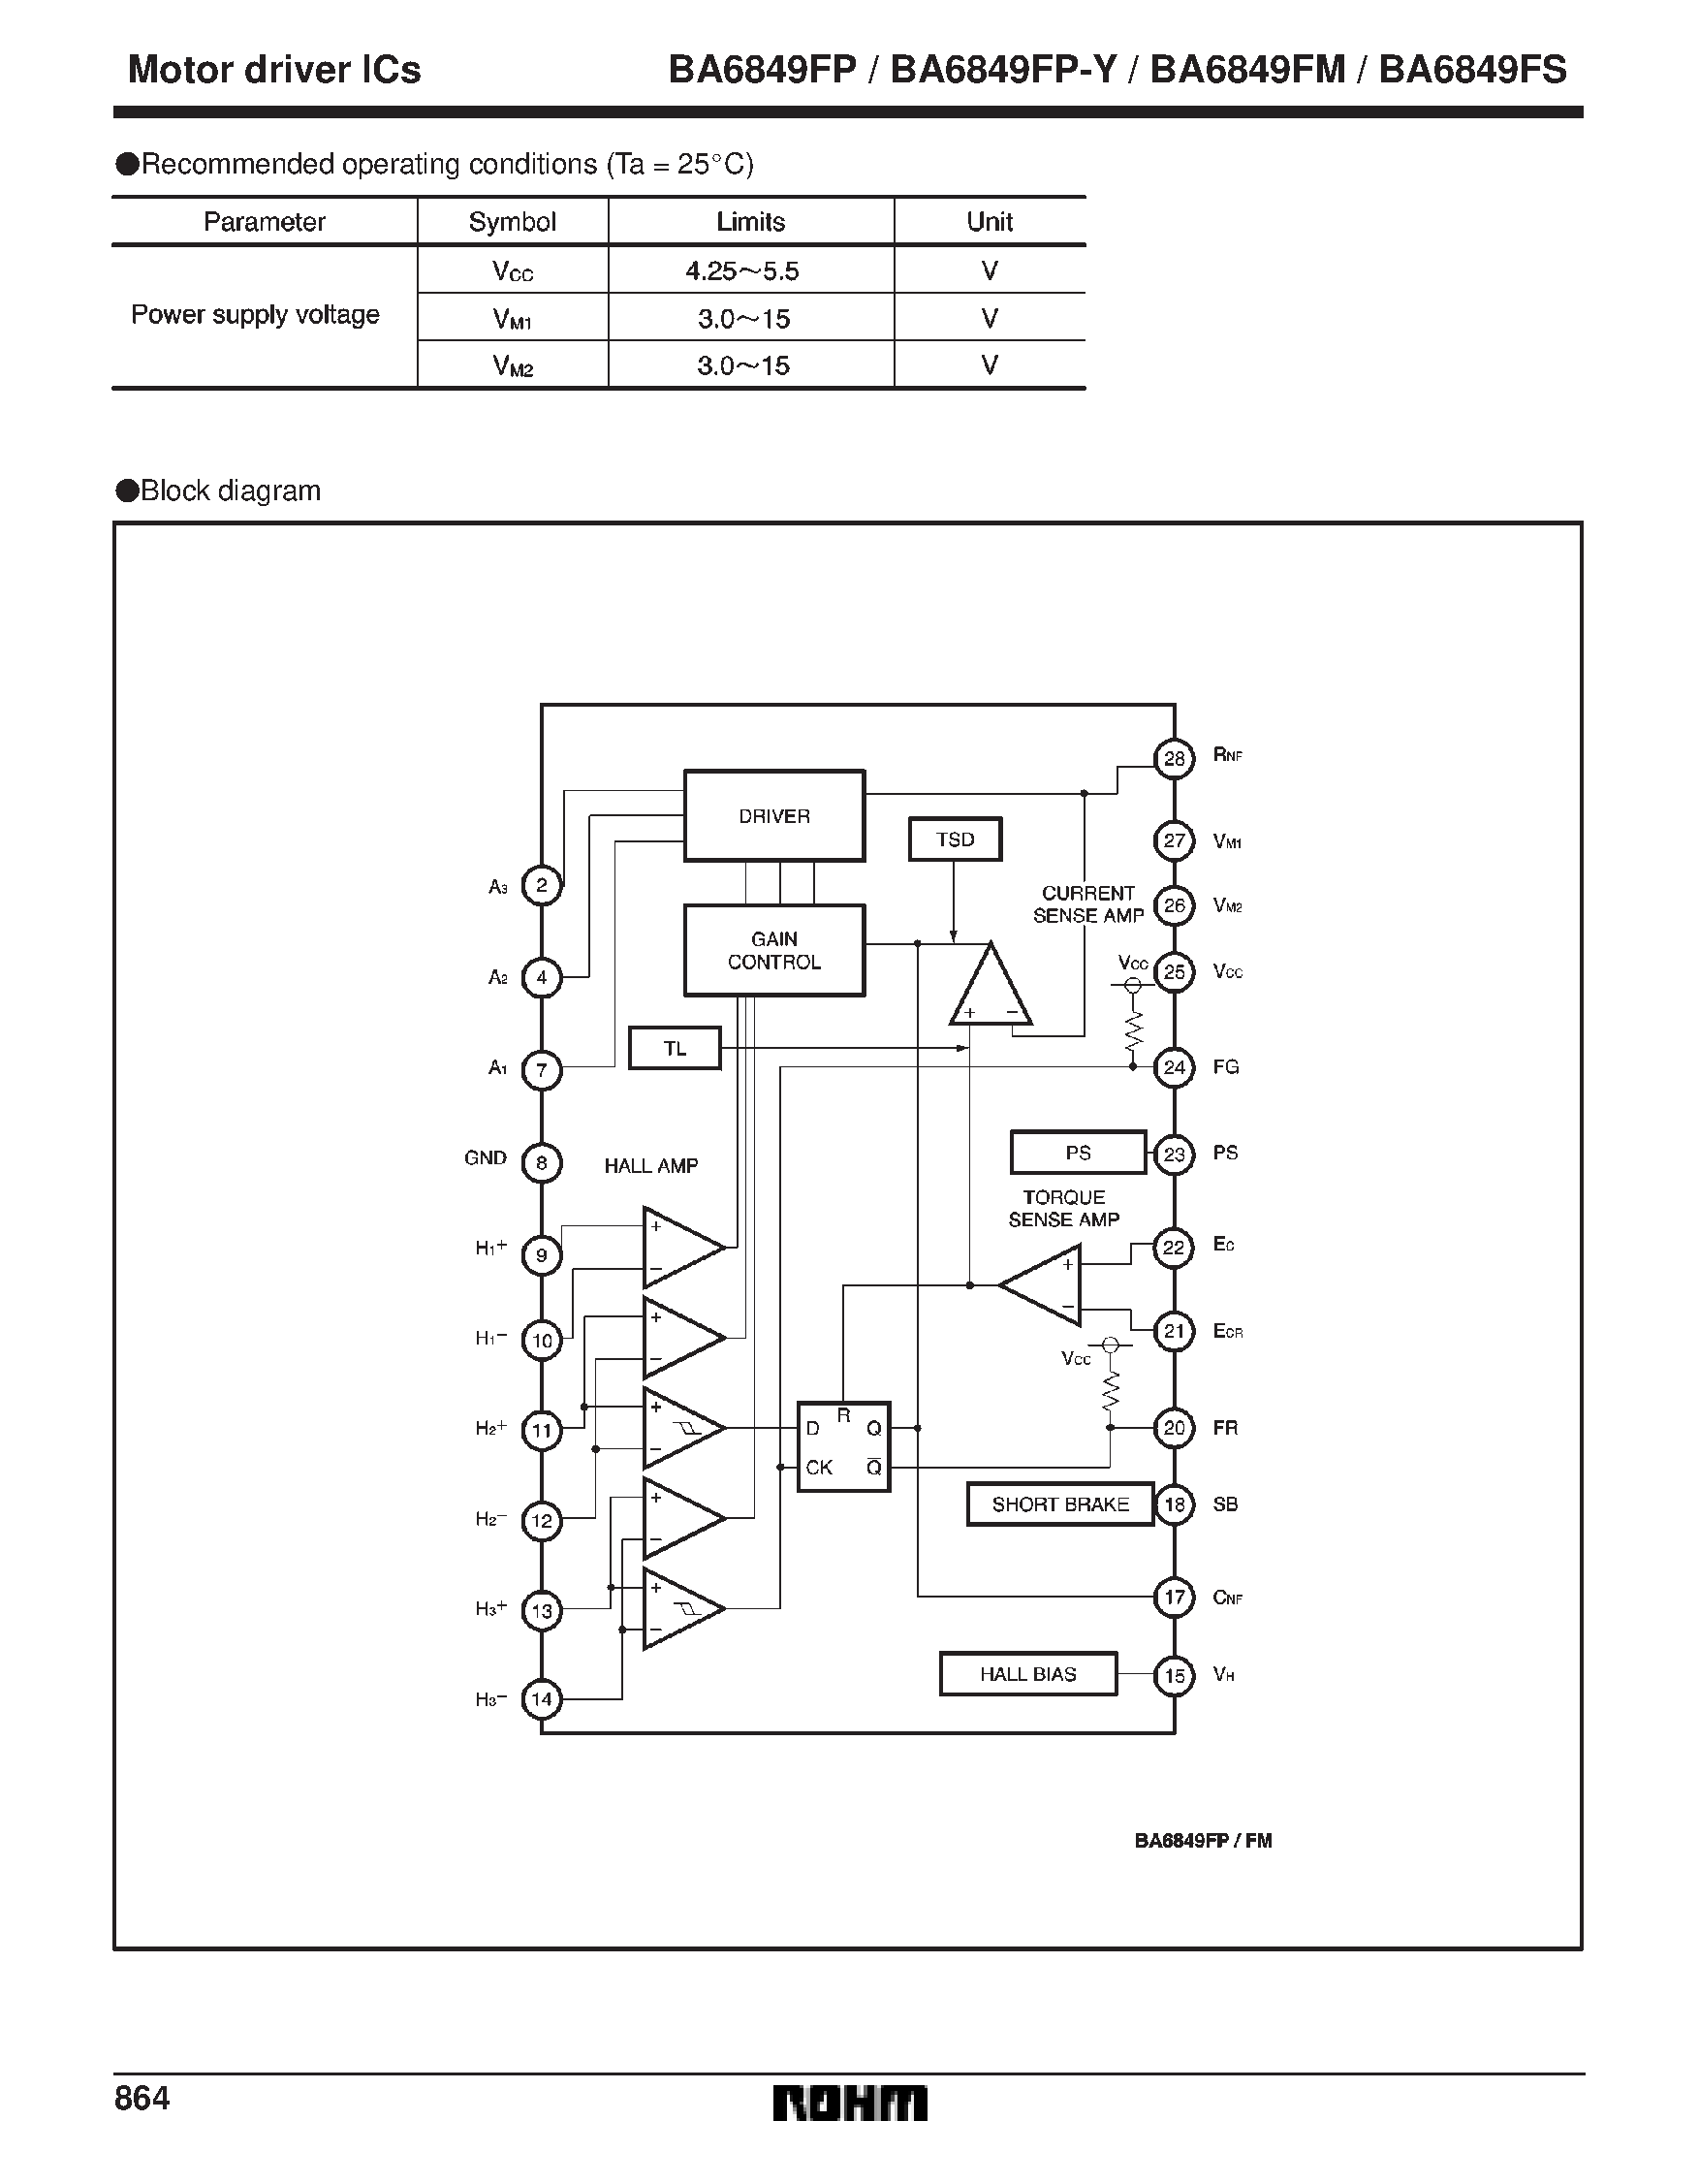 Datasheet BA6849FP-Y - 3-phase motor driver for CD-ROMs page 2